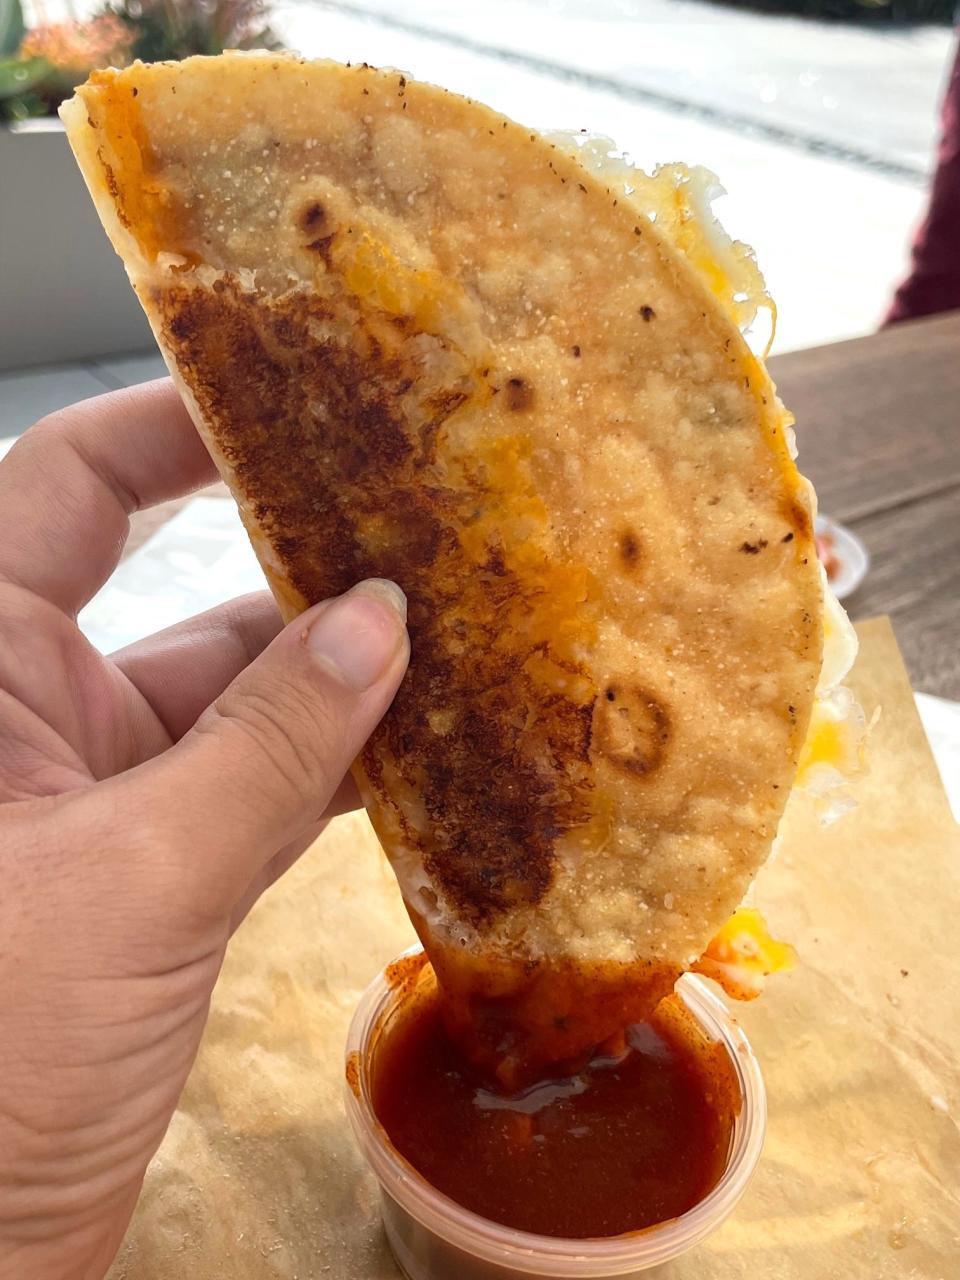 Taco Bell's Grilled Cheese Dipping Taco dipped in red sauce